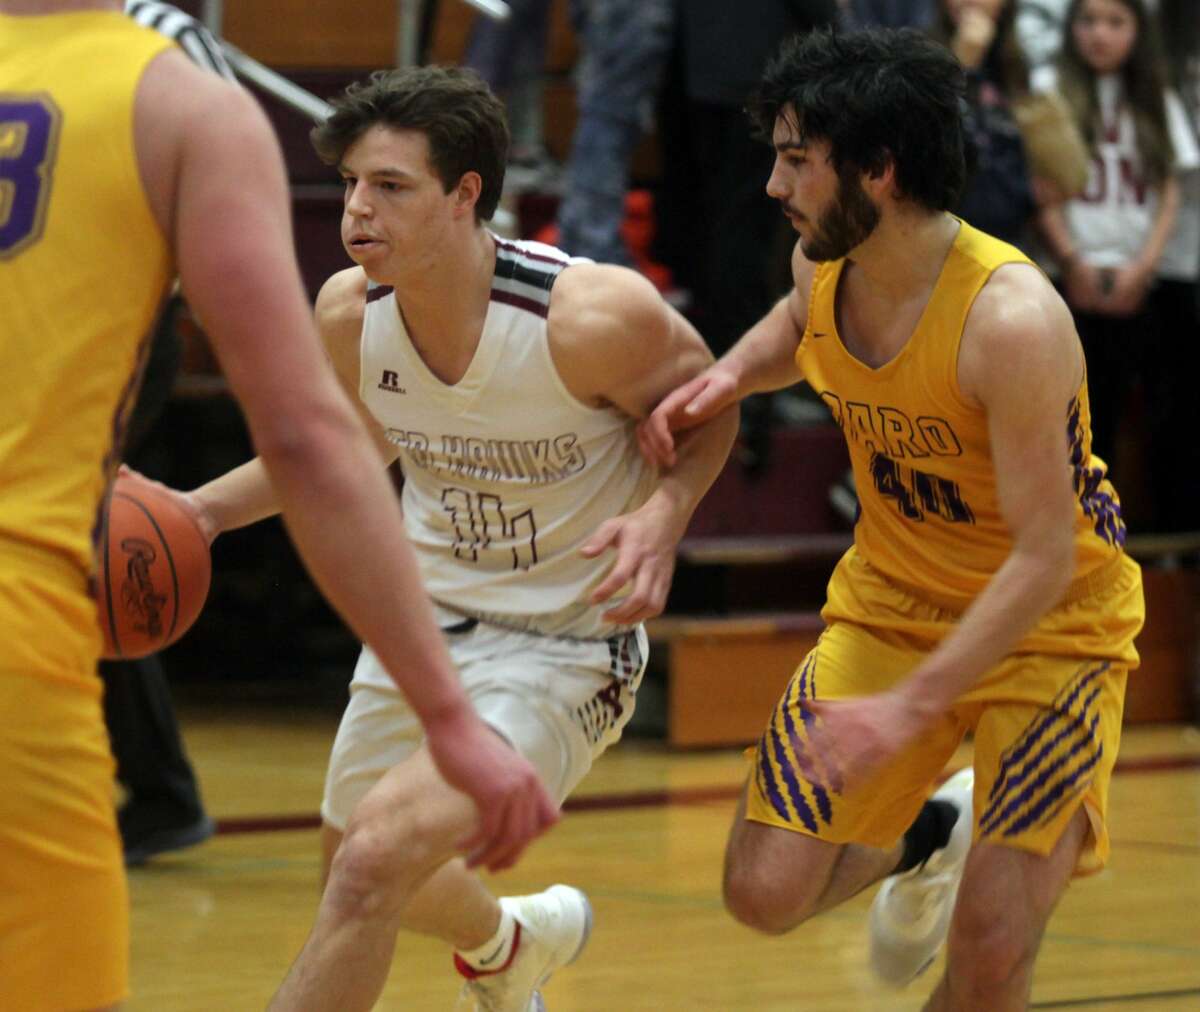 The Cass City boys basketball team recorded a 49-33 victory over Caro on Wednesday, Feb. 19.